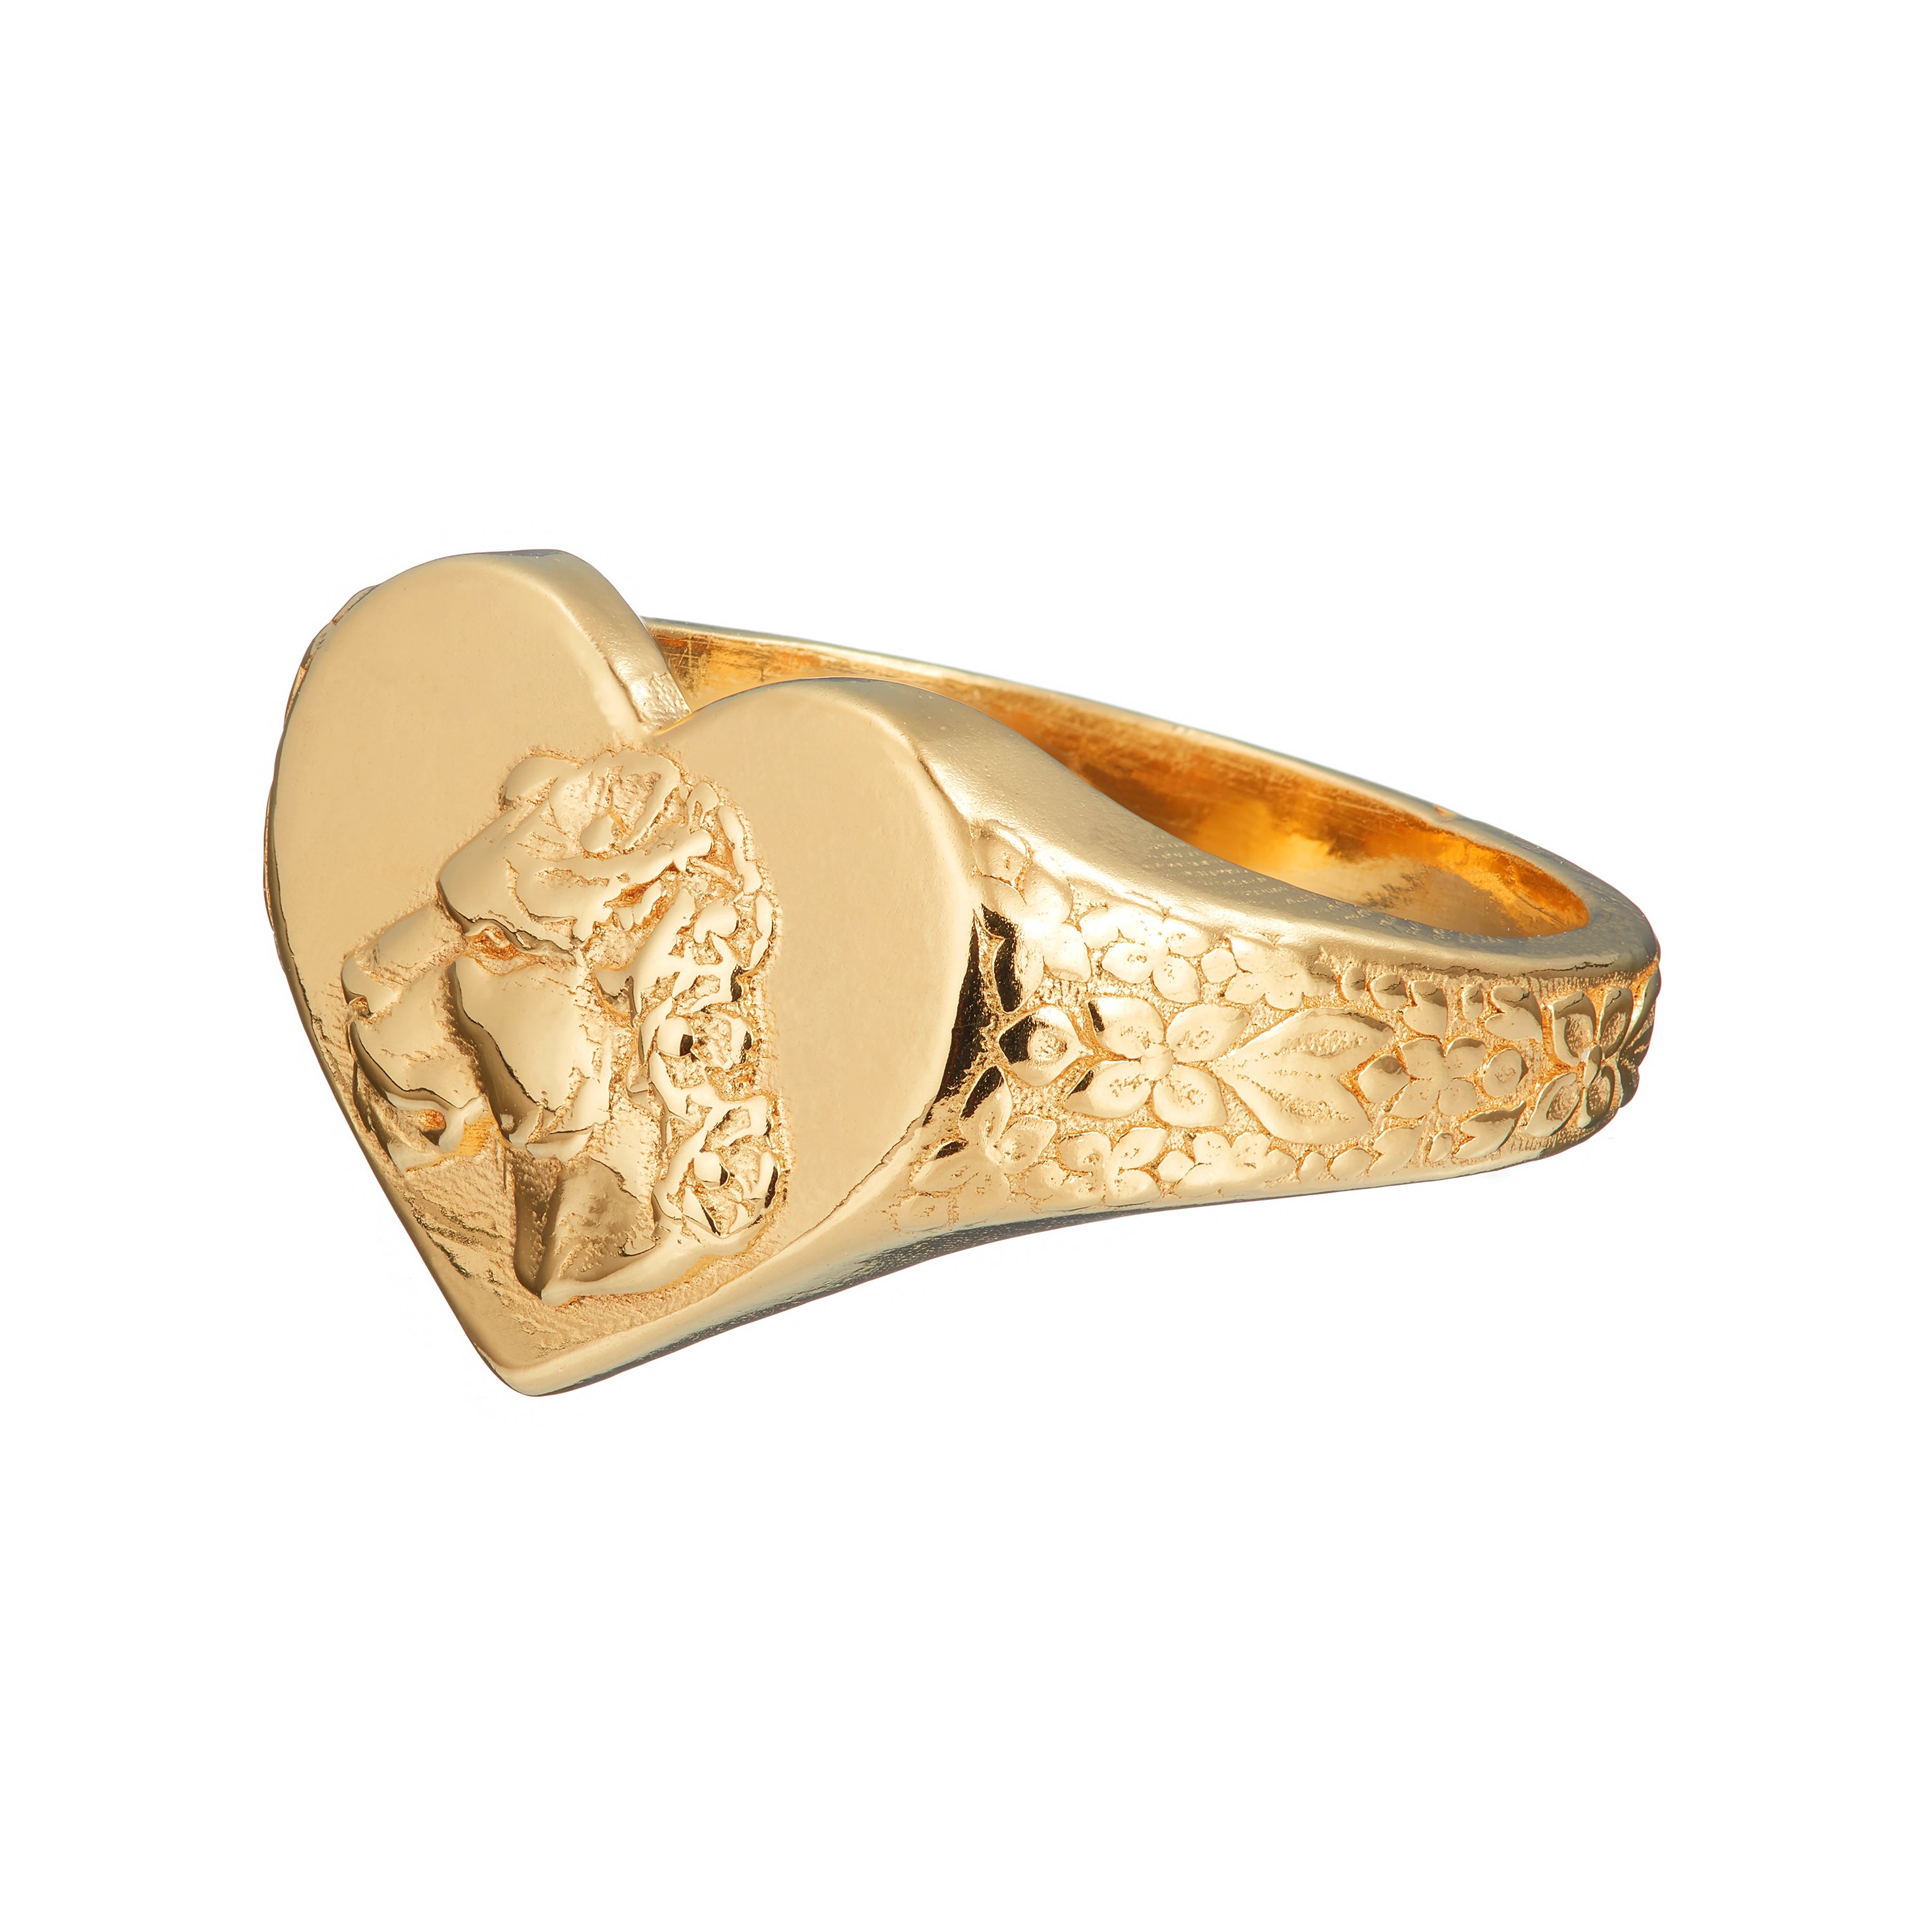 LIONESS HEART SIGNET RING